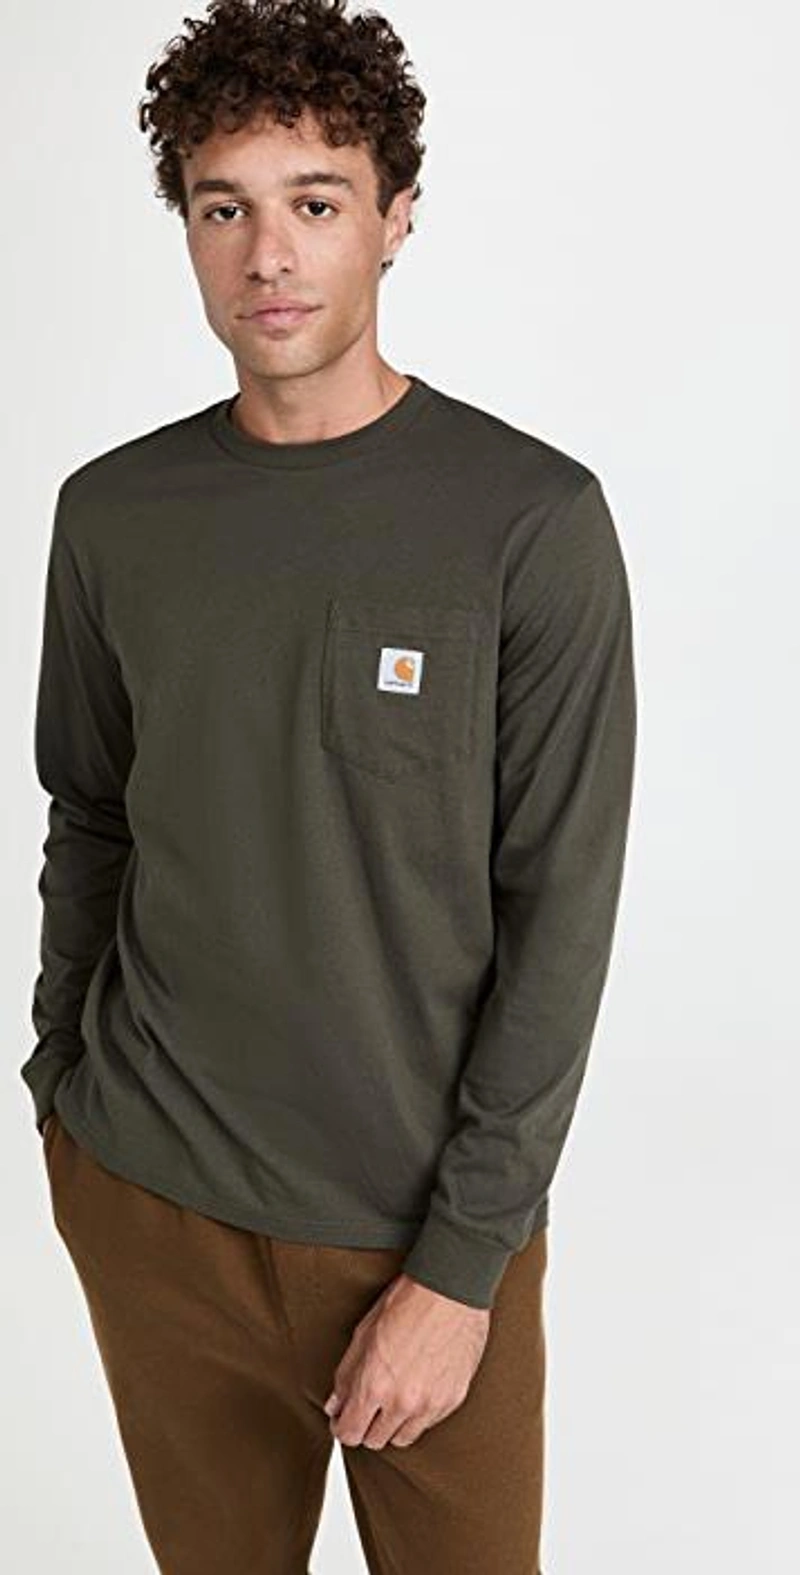 shopbop.com's Posts | 搭配: Carhartt Long Sleeve Pocket T-shirt In Cypress；Lemaire Drawstring-waist Fleece Track Pants In Khaki；Lemaire Crew-neck Cotton-blend Jersey Sweatshirt In Brown